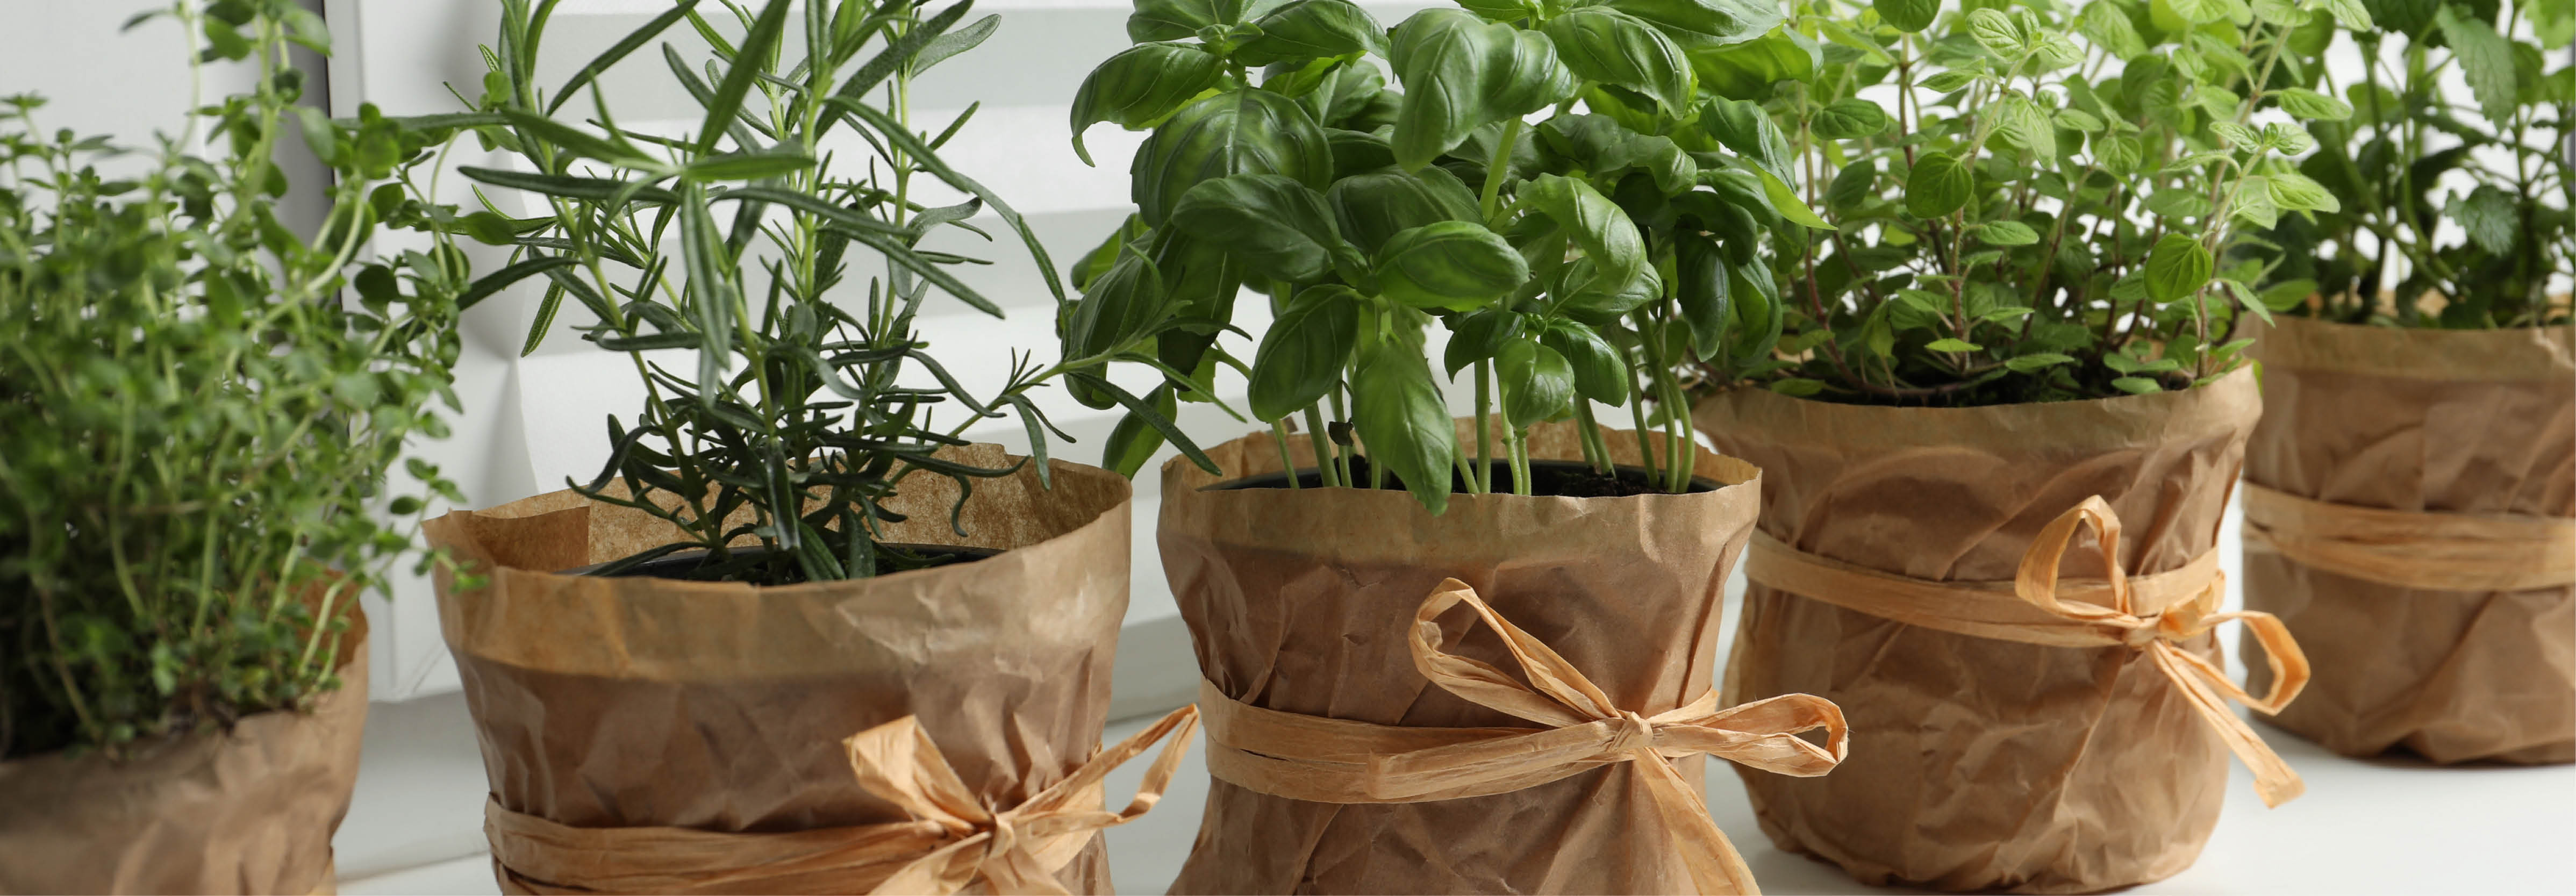 4 pots of rosemary, basil and thyme wrapped in brown paper and string